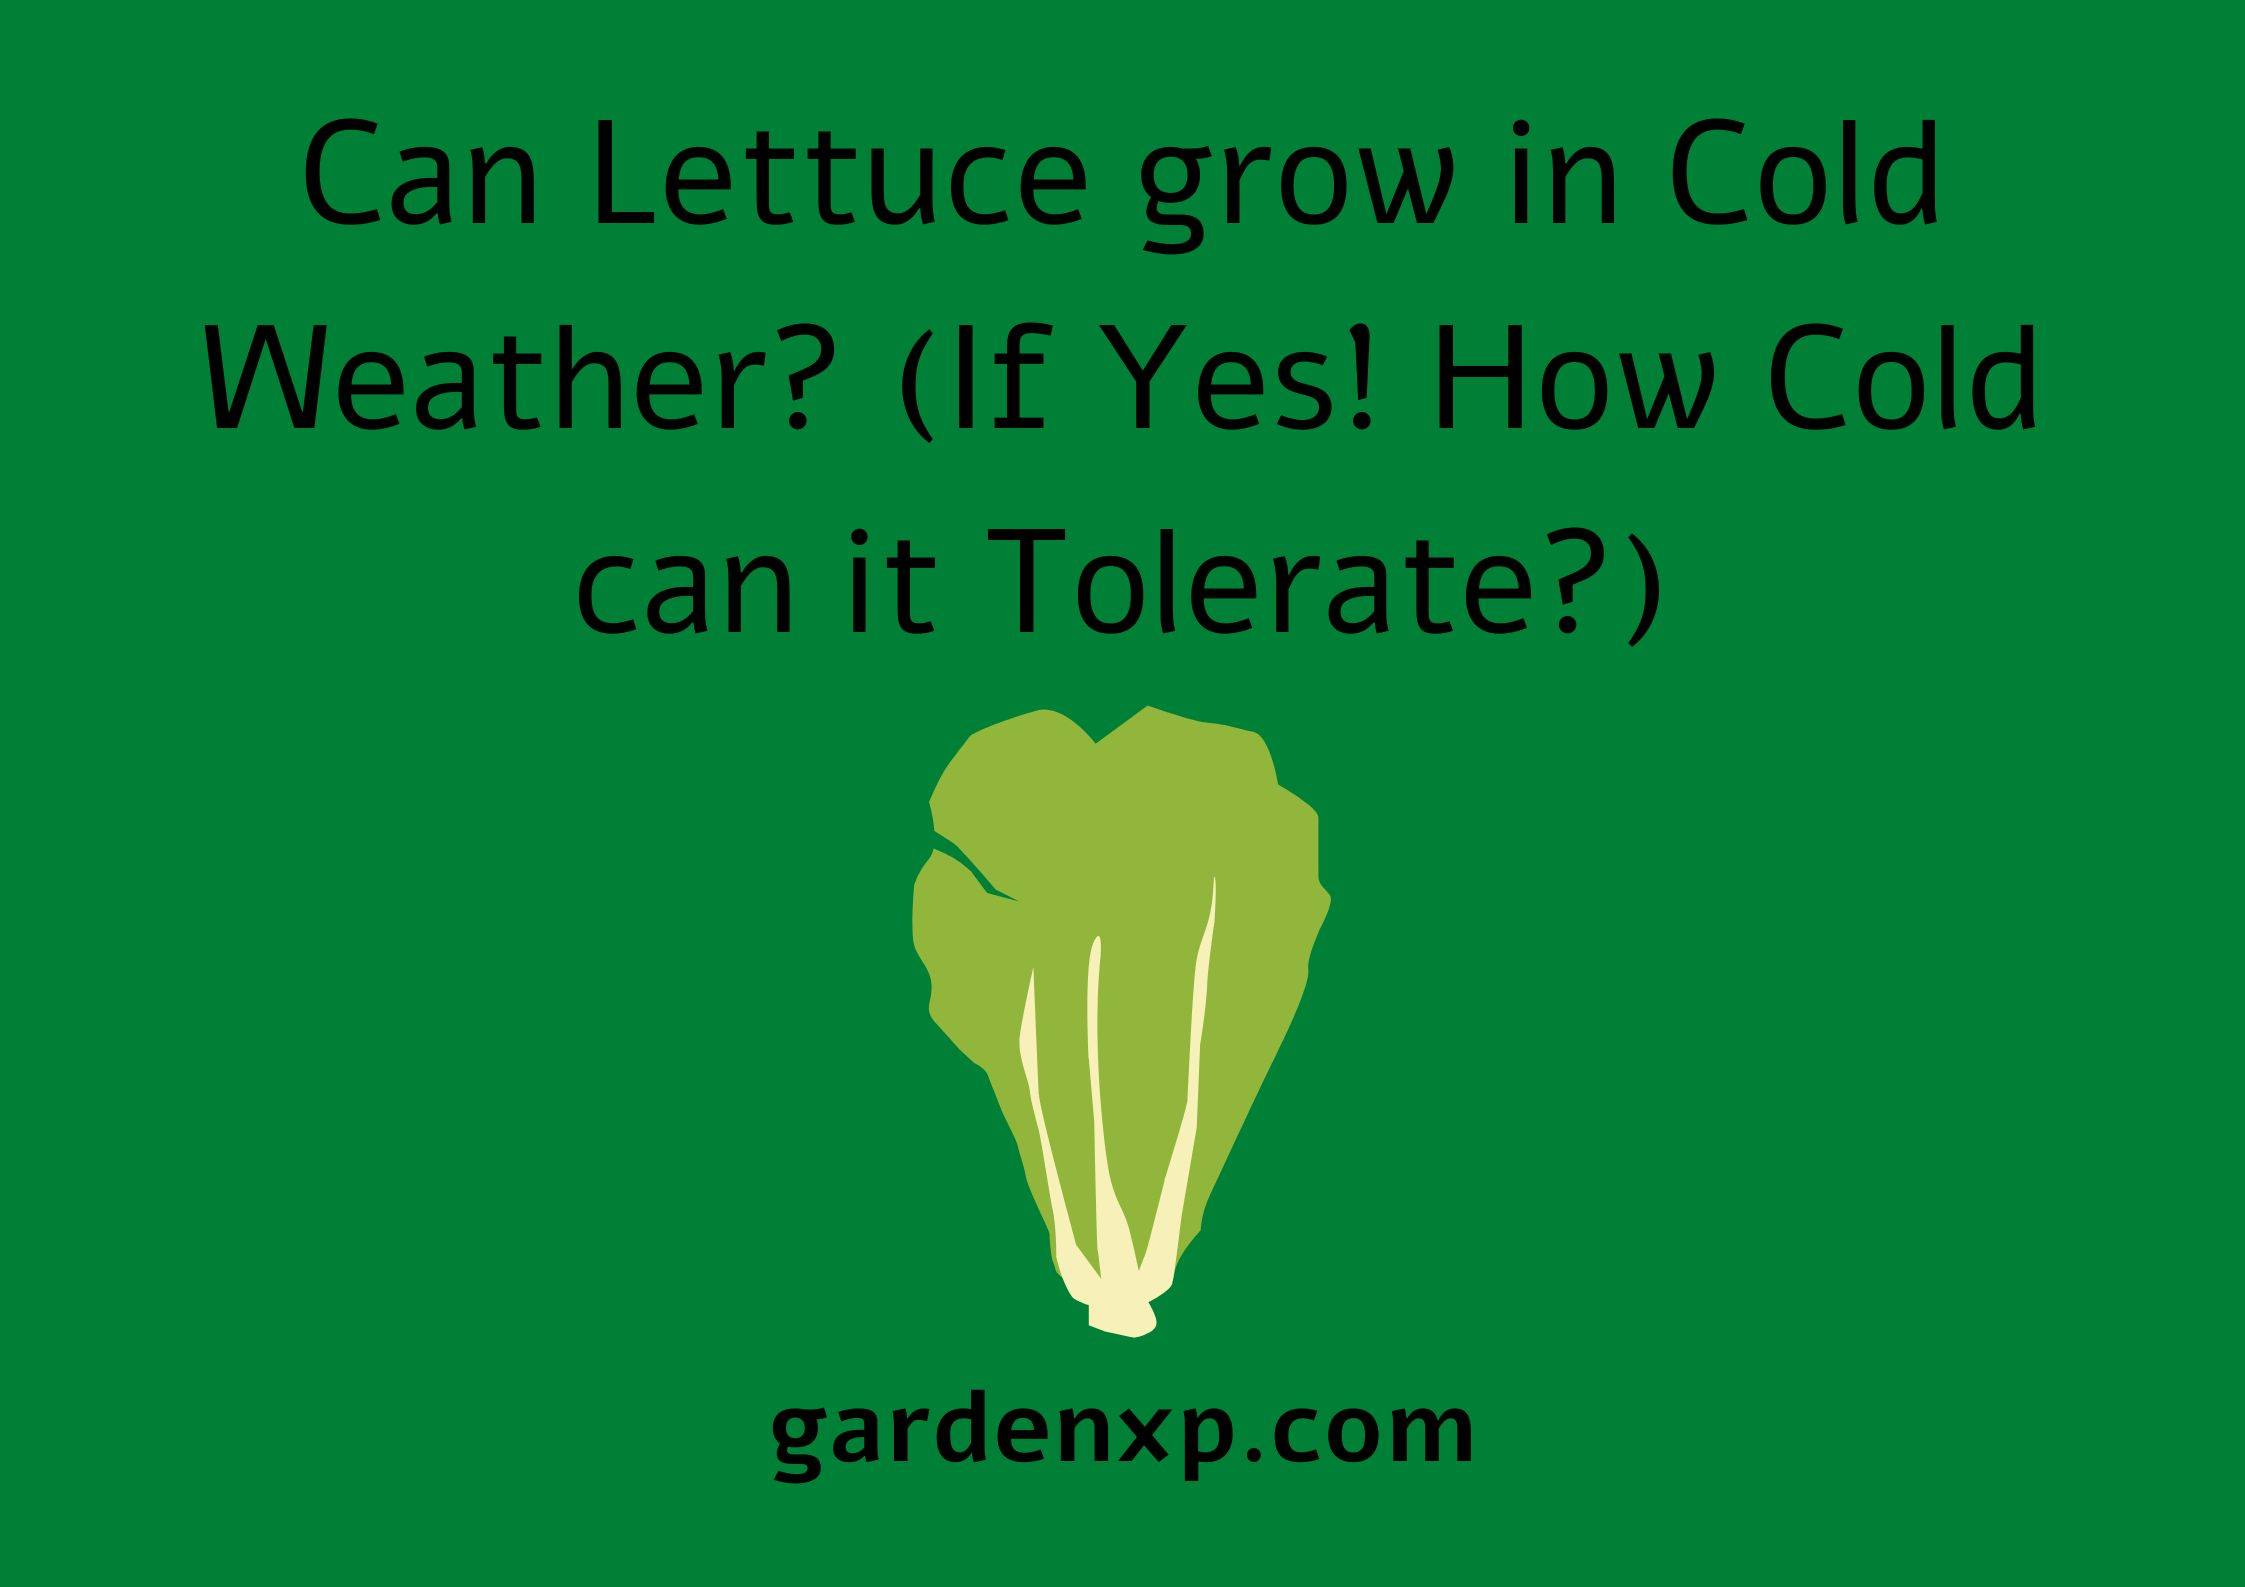 Can Lettuce grow in Cold Weather? (If Yes! How Cold can it Tolerate?)